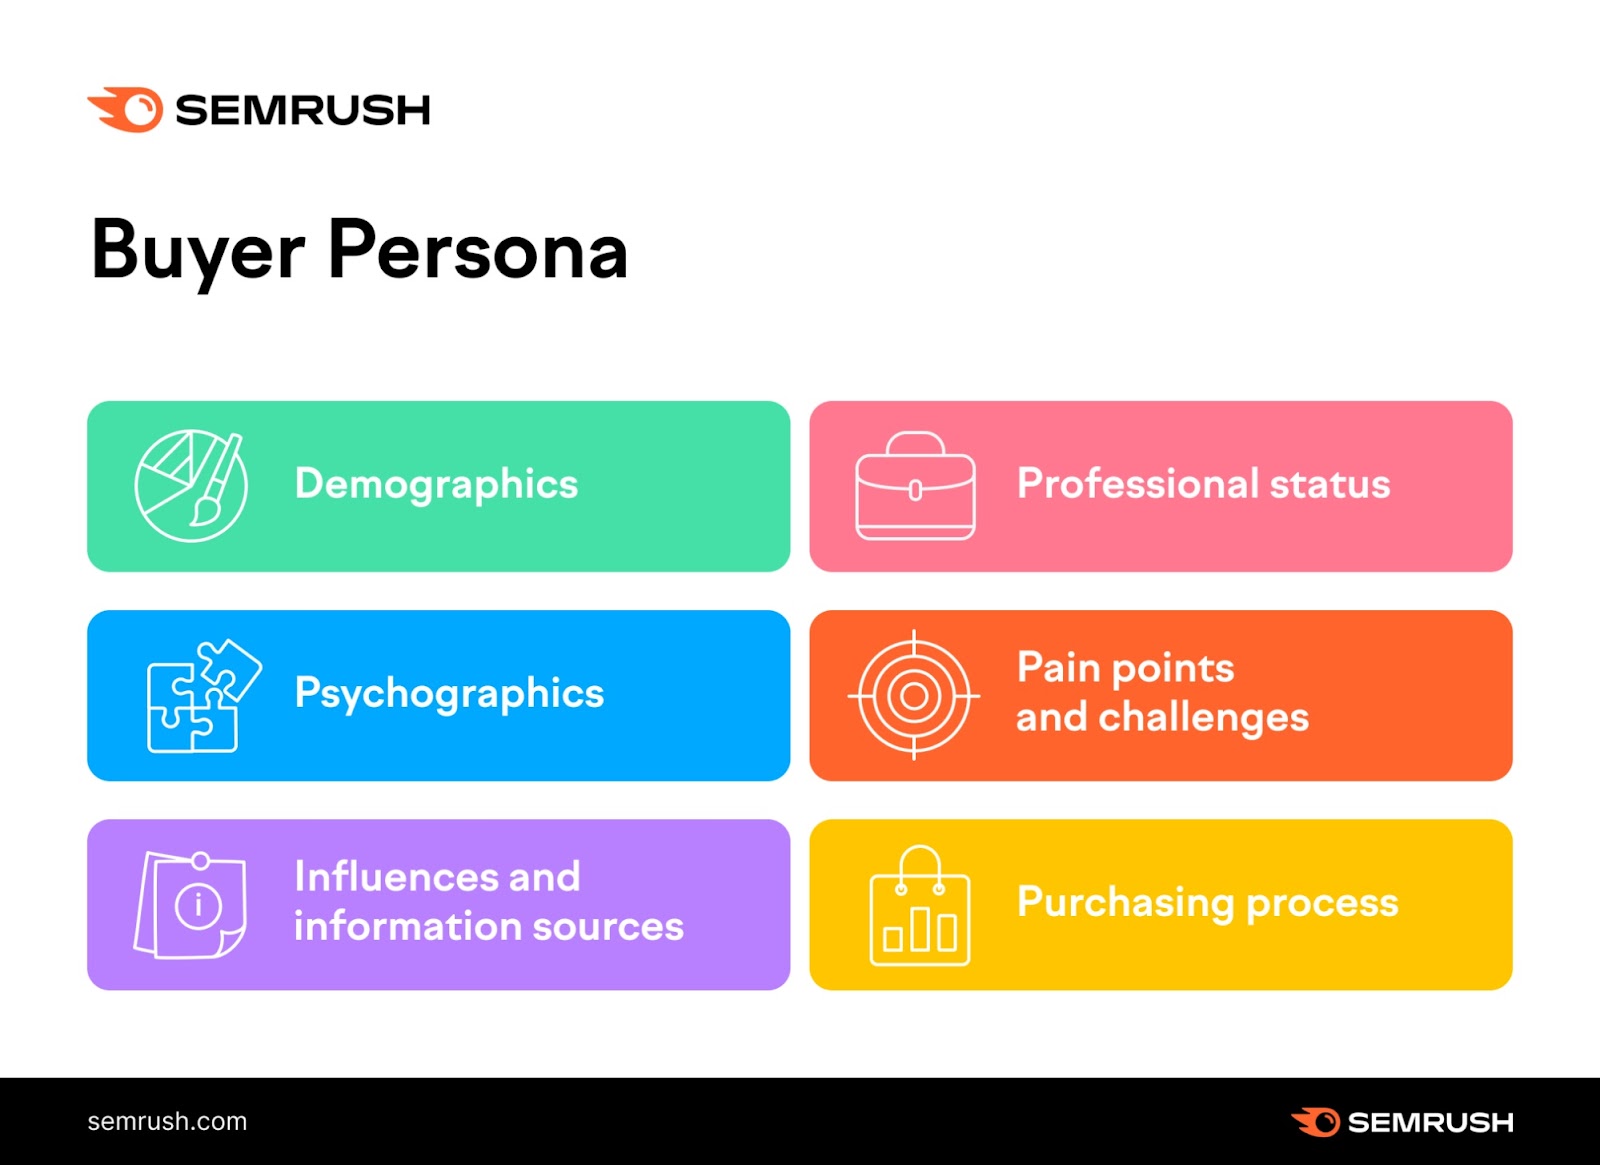 Buyer persona categories are demographics, nonrecreational  status, psychographics, symptom  points and challenges, influences and accusation  sources, and purchasing process